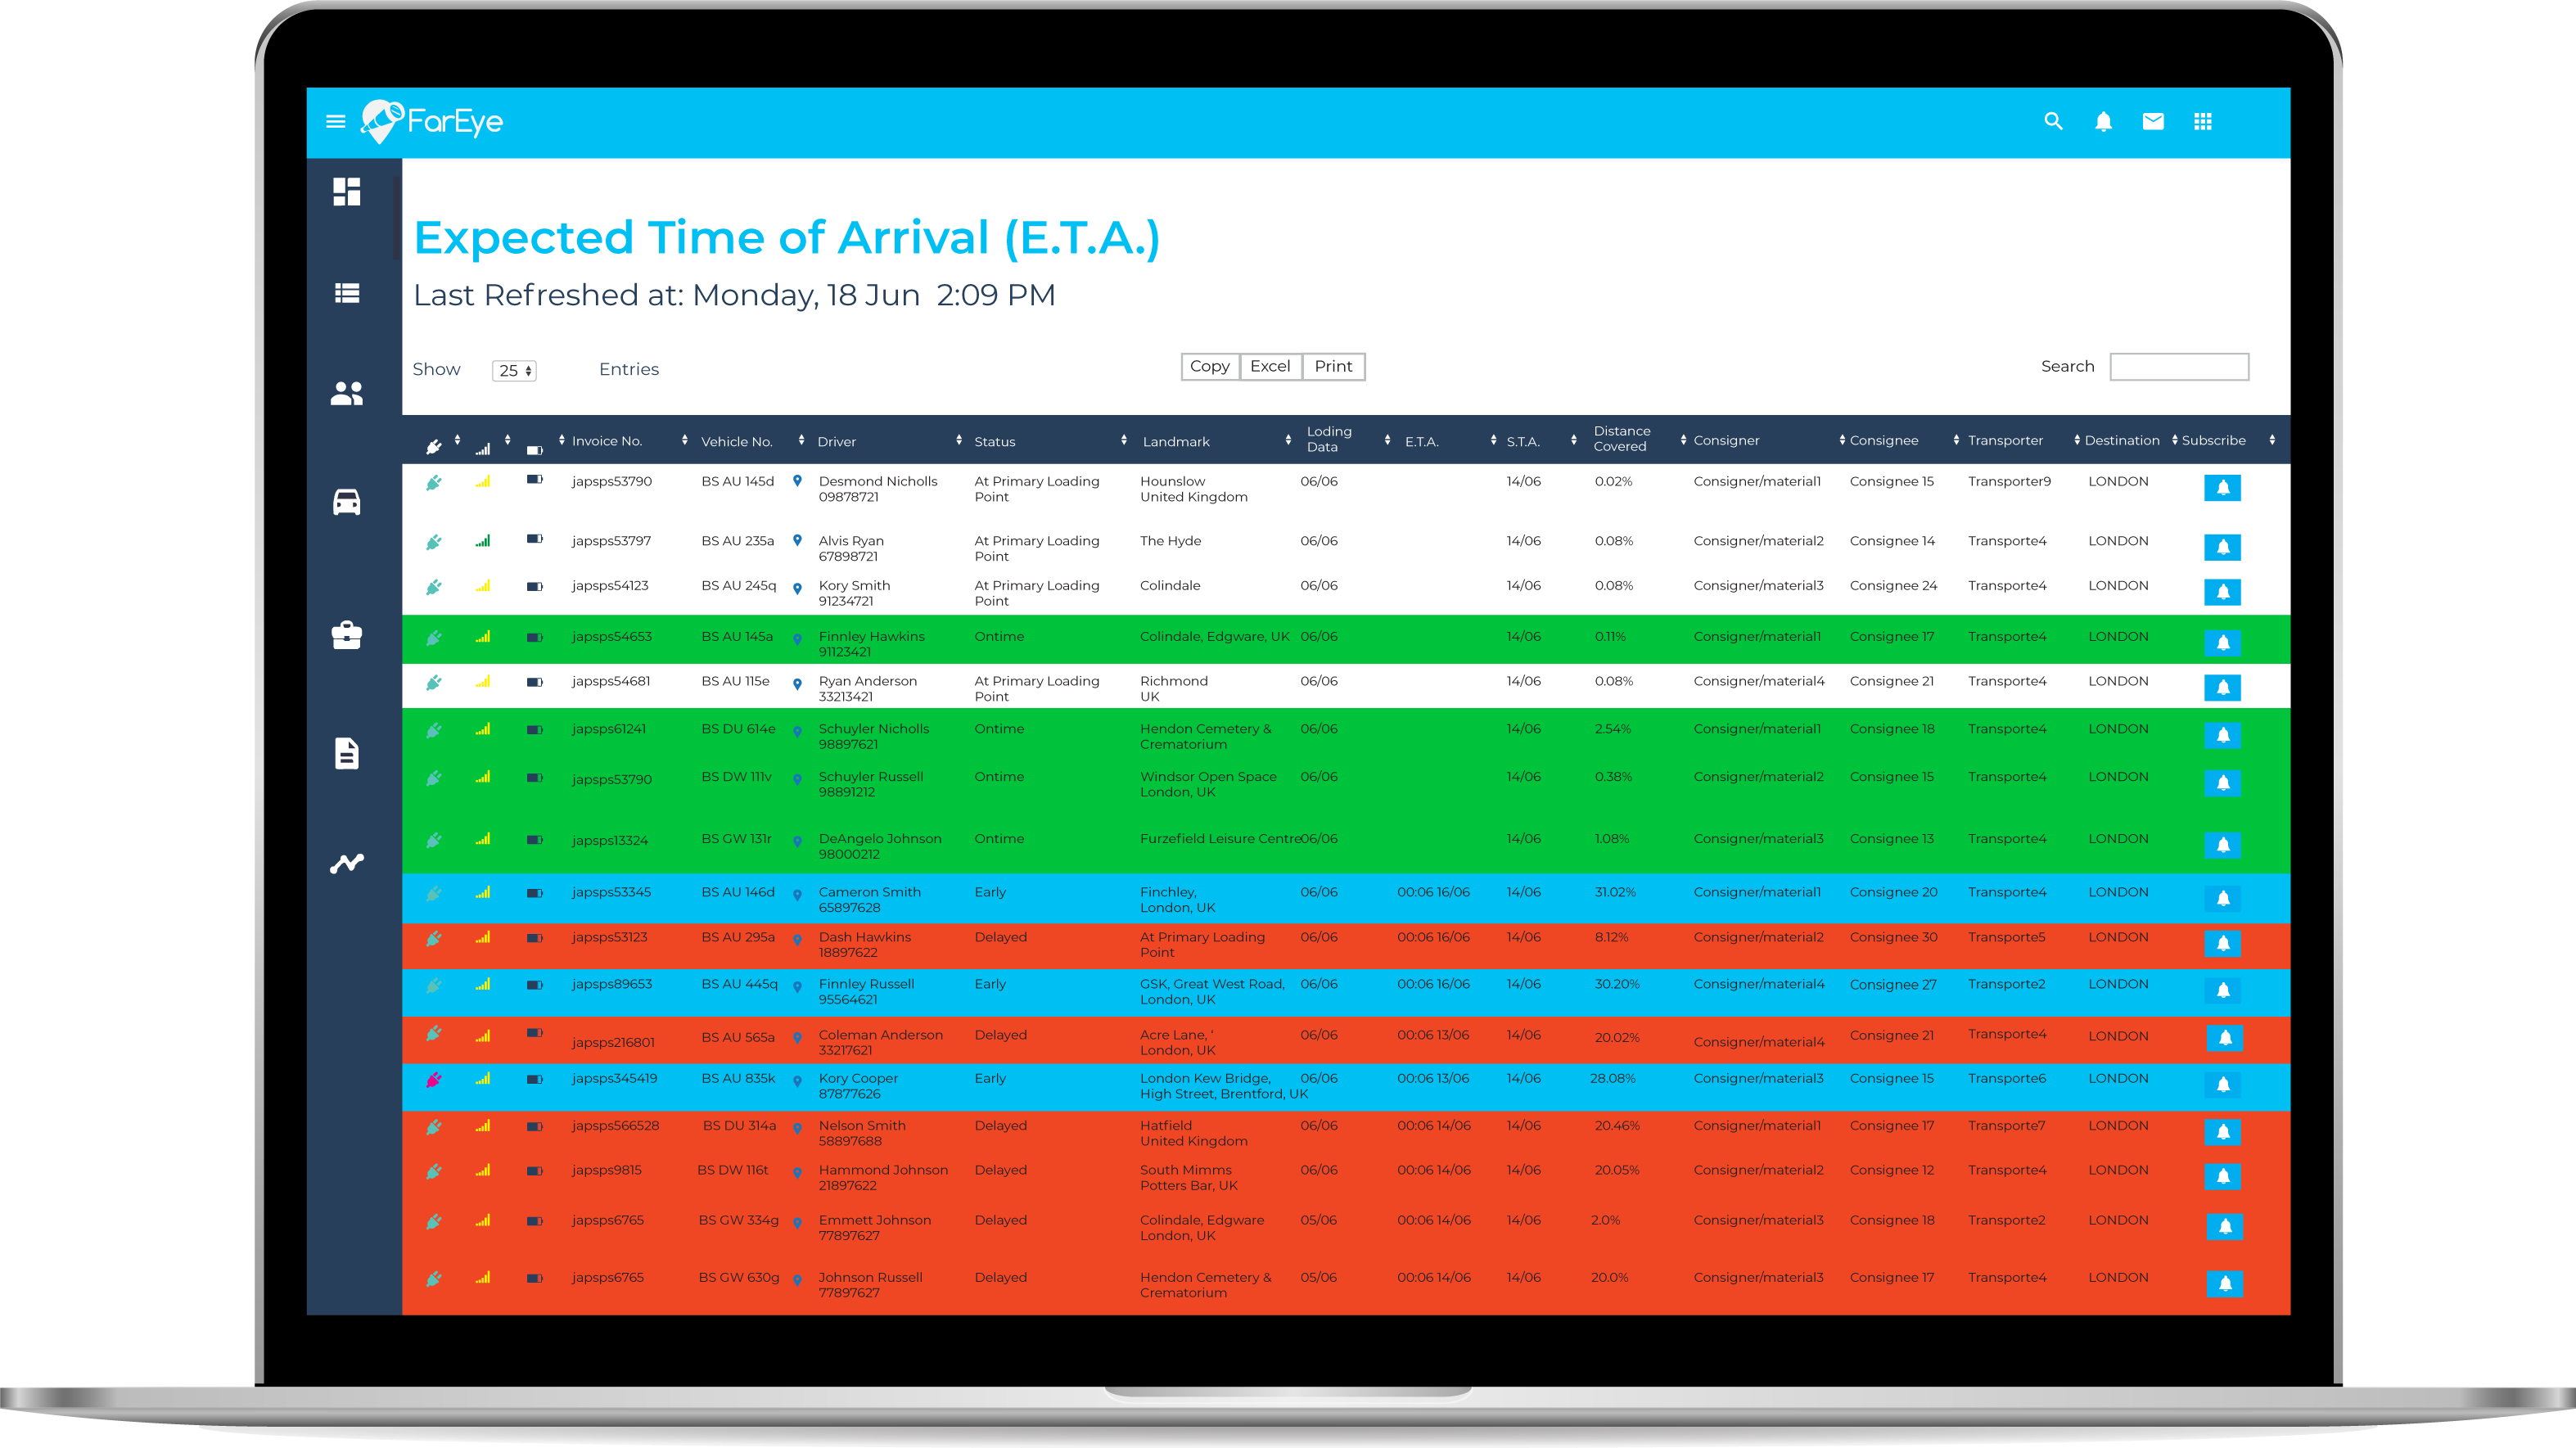 Intelligent Delivery Orchestration Platform Software - Get predictive ETA visibility into all your shipments and slot them as on-time, delayed and early arrival. This can help you mitigate delays with the required checks and corrective actions.